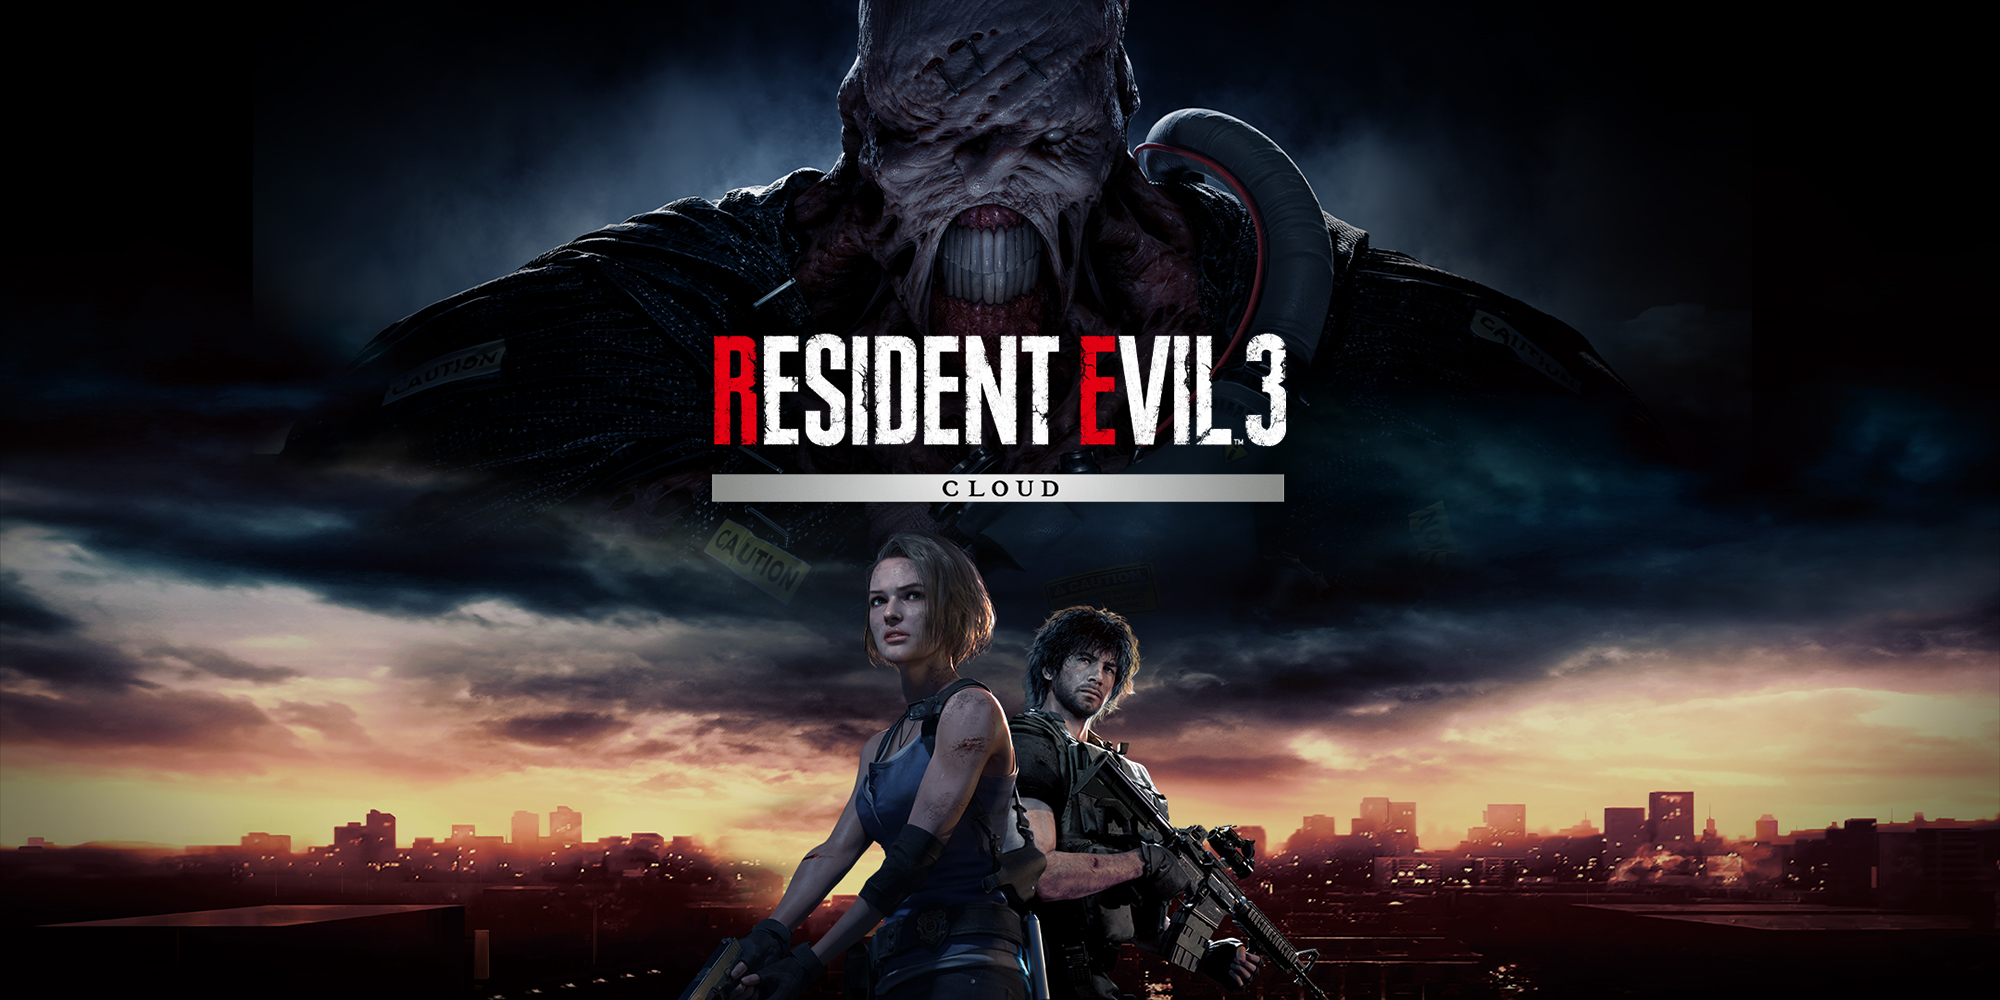 Resident Evil 3 Cloud, Nintendo Switch download software, Games